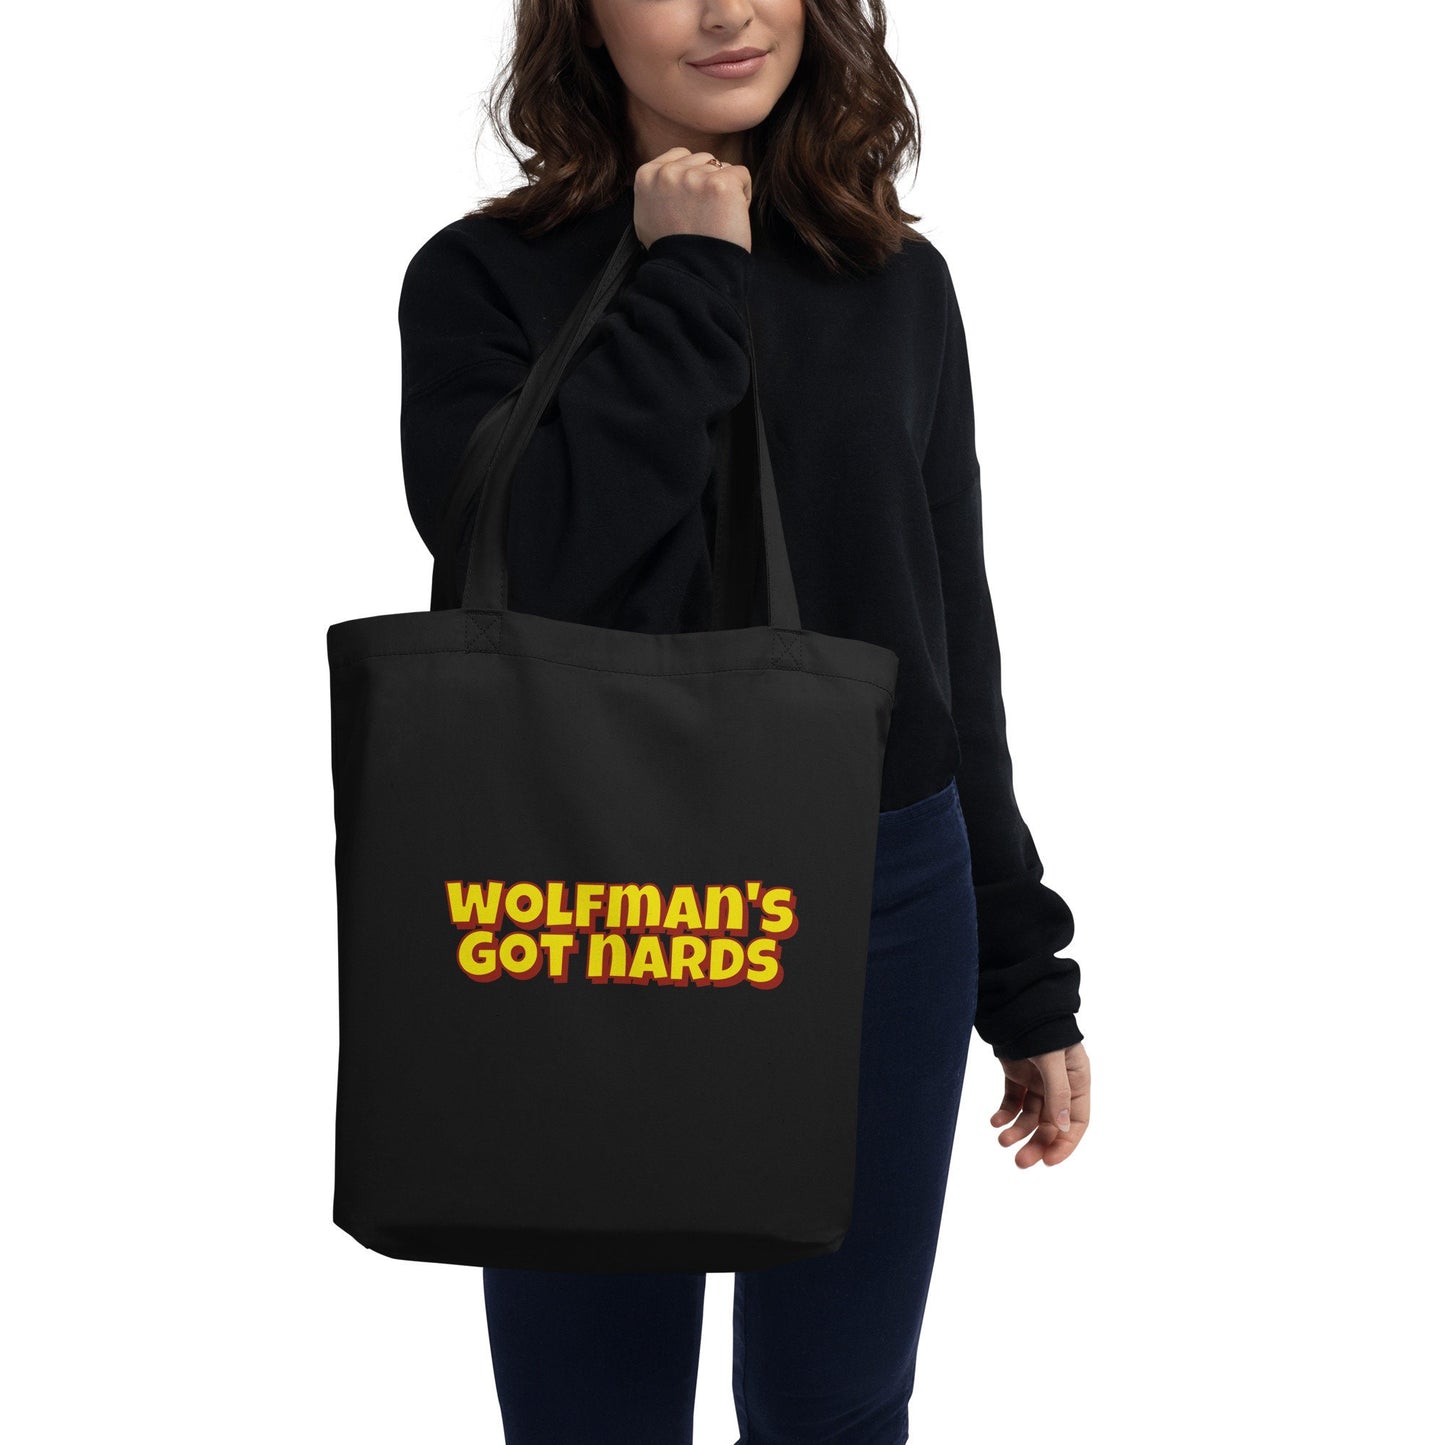 Wolfman's Got Nards Tote / Monster Squad Tote / Horror tote / the weird emporium